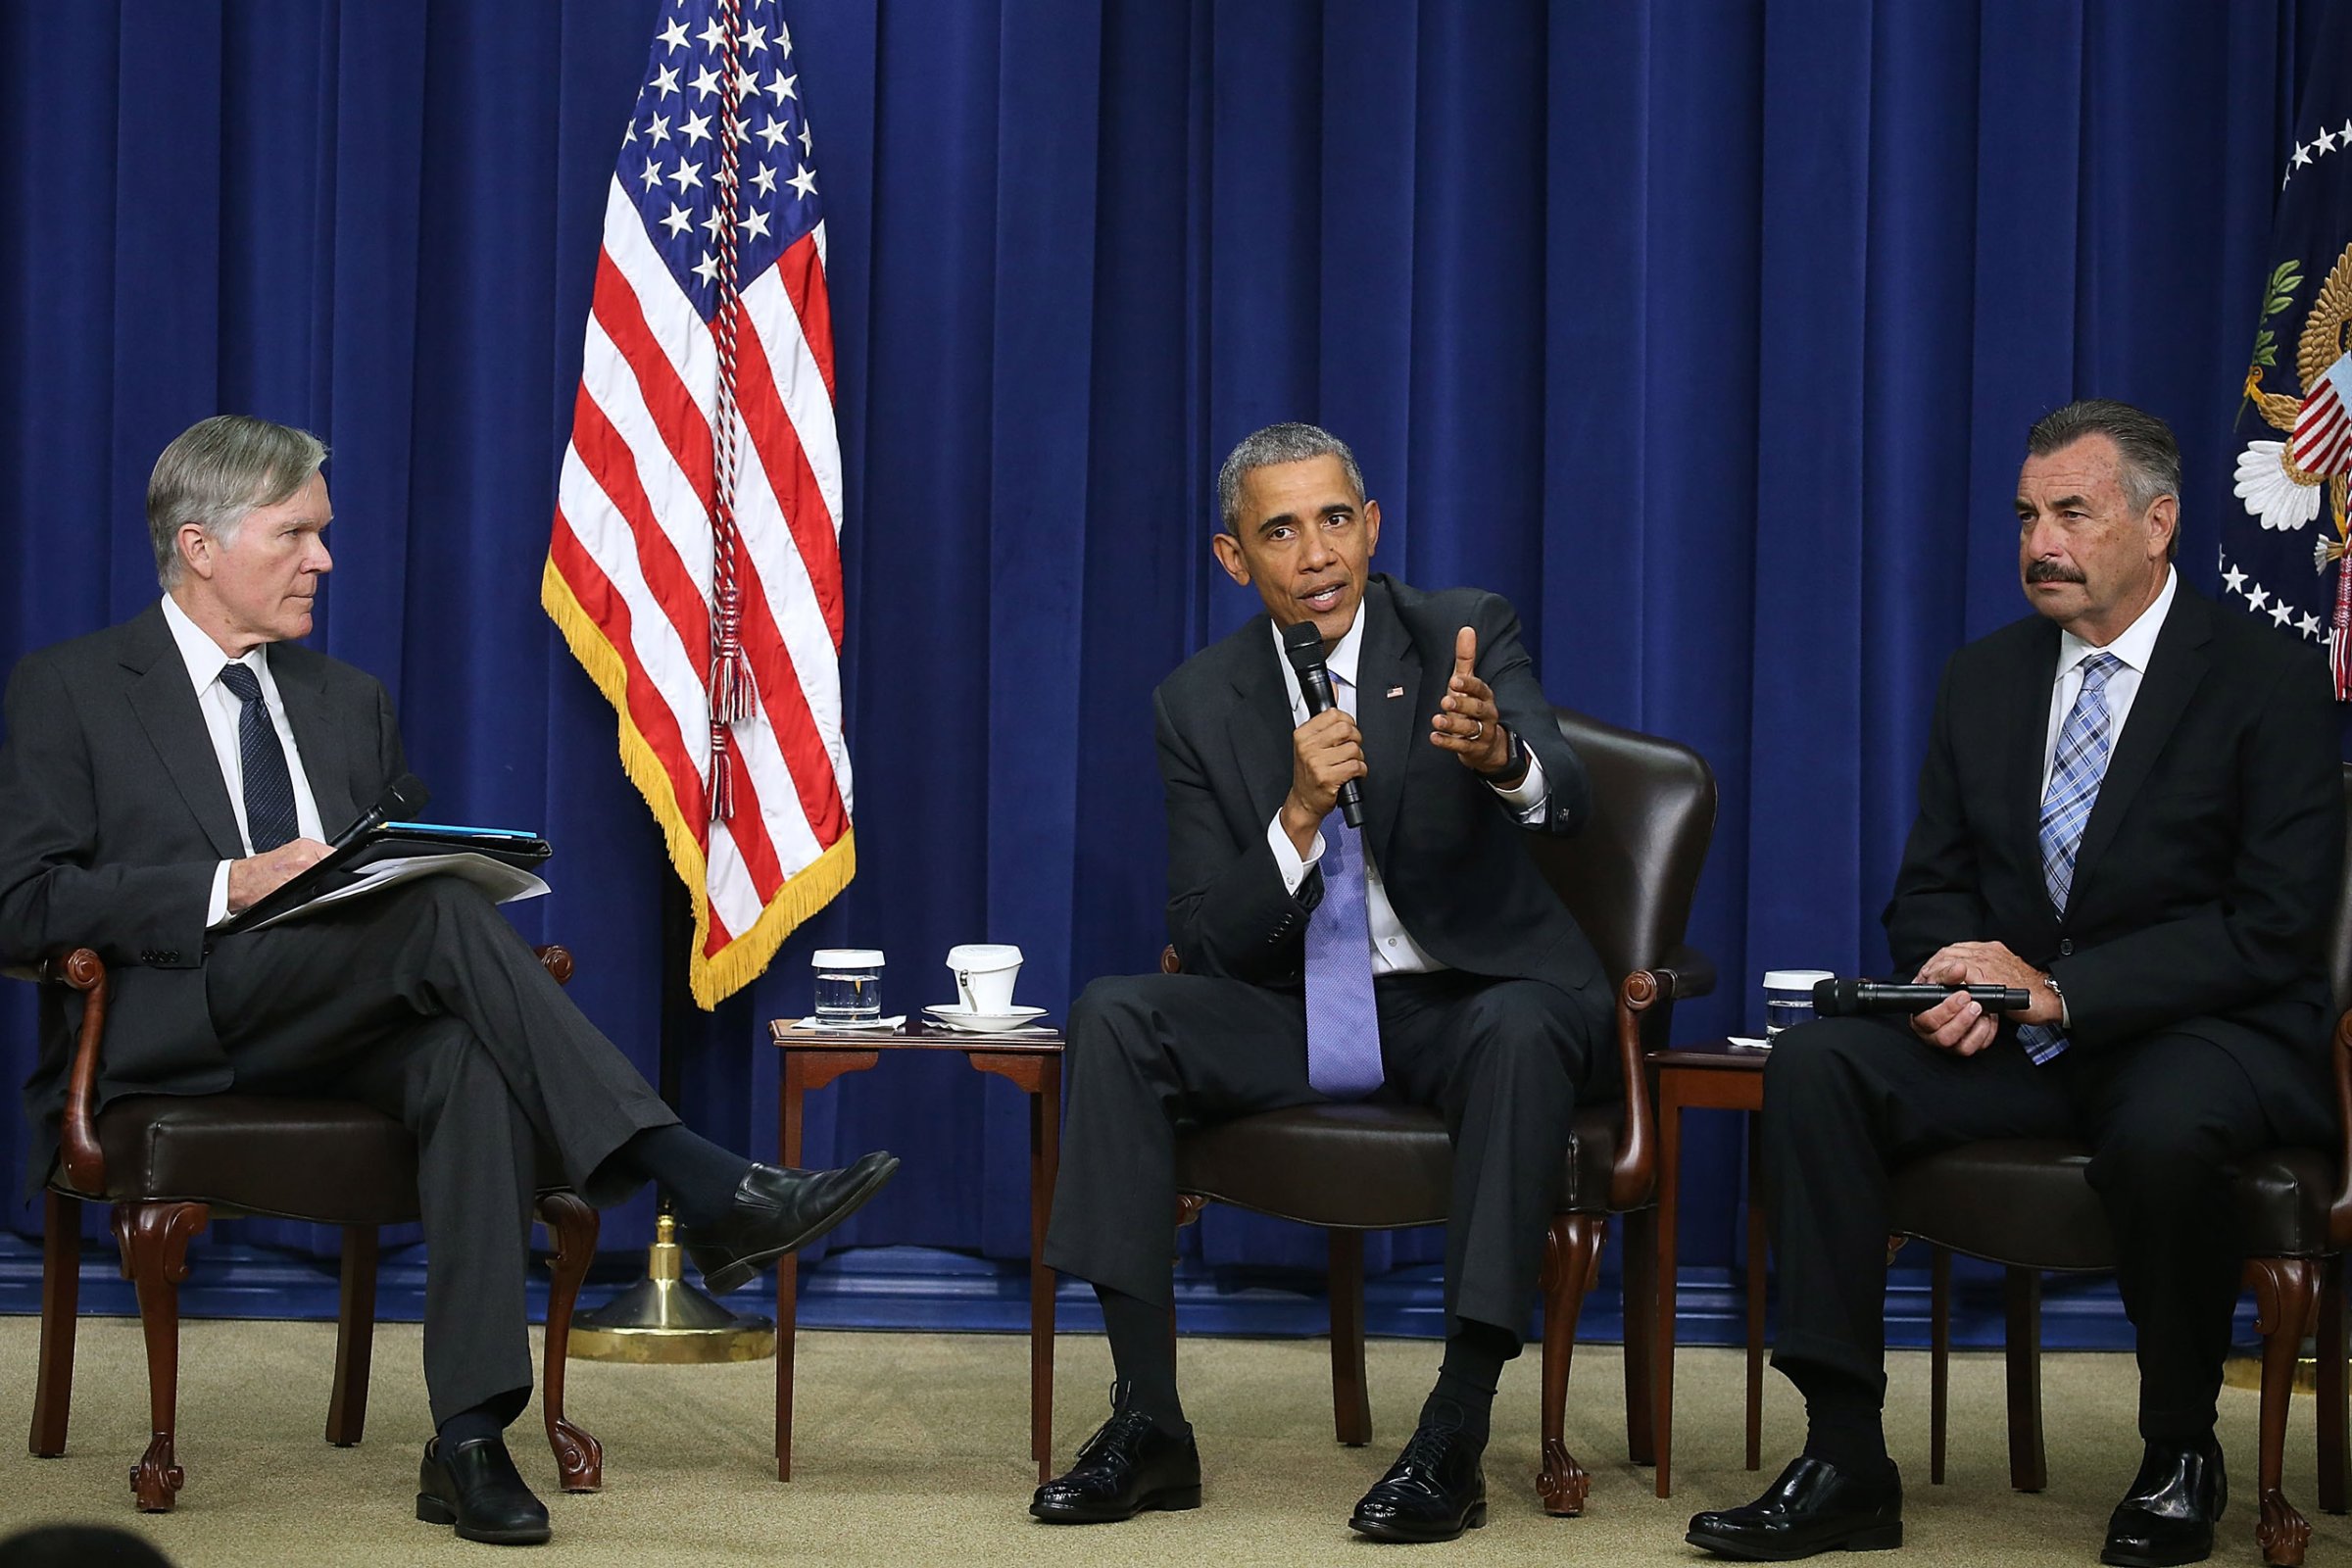 WASHINGTON, DC - OCTOBER 22: U.S. President Barack Obama participates in a conversation on criminal justice reform while flanked by Bill Keller (L) of The Marshall Project, and Charlie Beck (R) of the Los Angleles Police, at the White House October 22, 2015 in Washington, DC. Later this month the√äSenate Judiciary Committee plans to vote on the Smarter Sentencing Act, which hopes to reform mandatory-minimum sentencing and the federal prison system. (Photo by Mark Wilson/Getty Images)